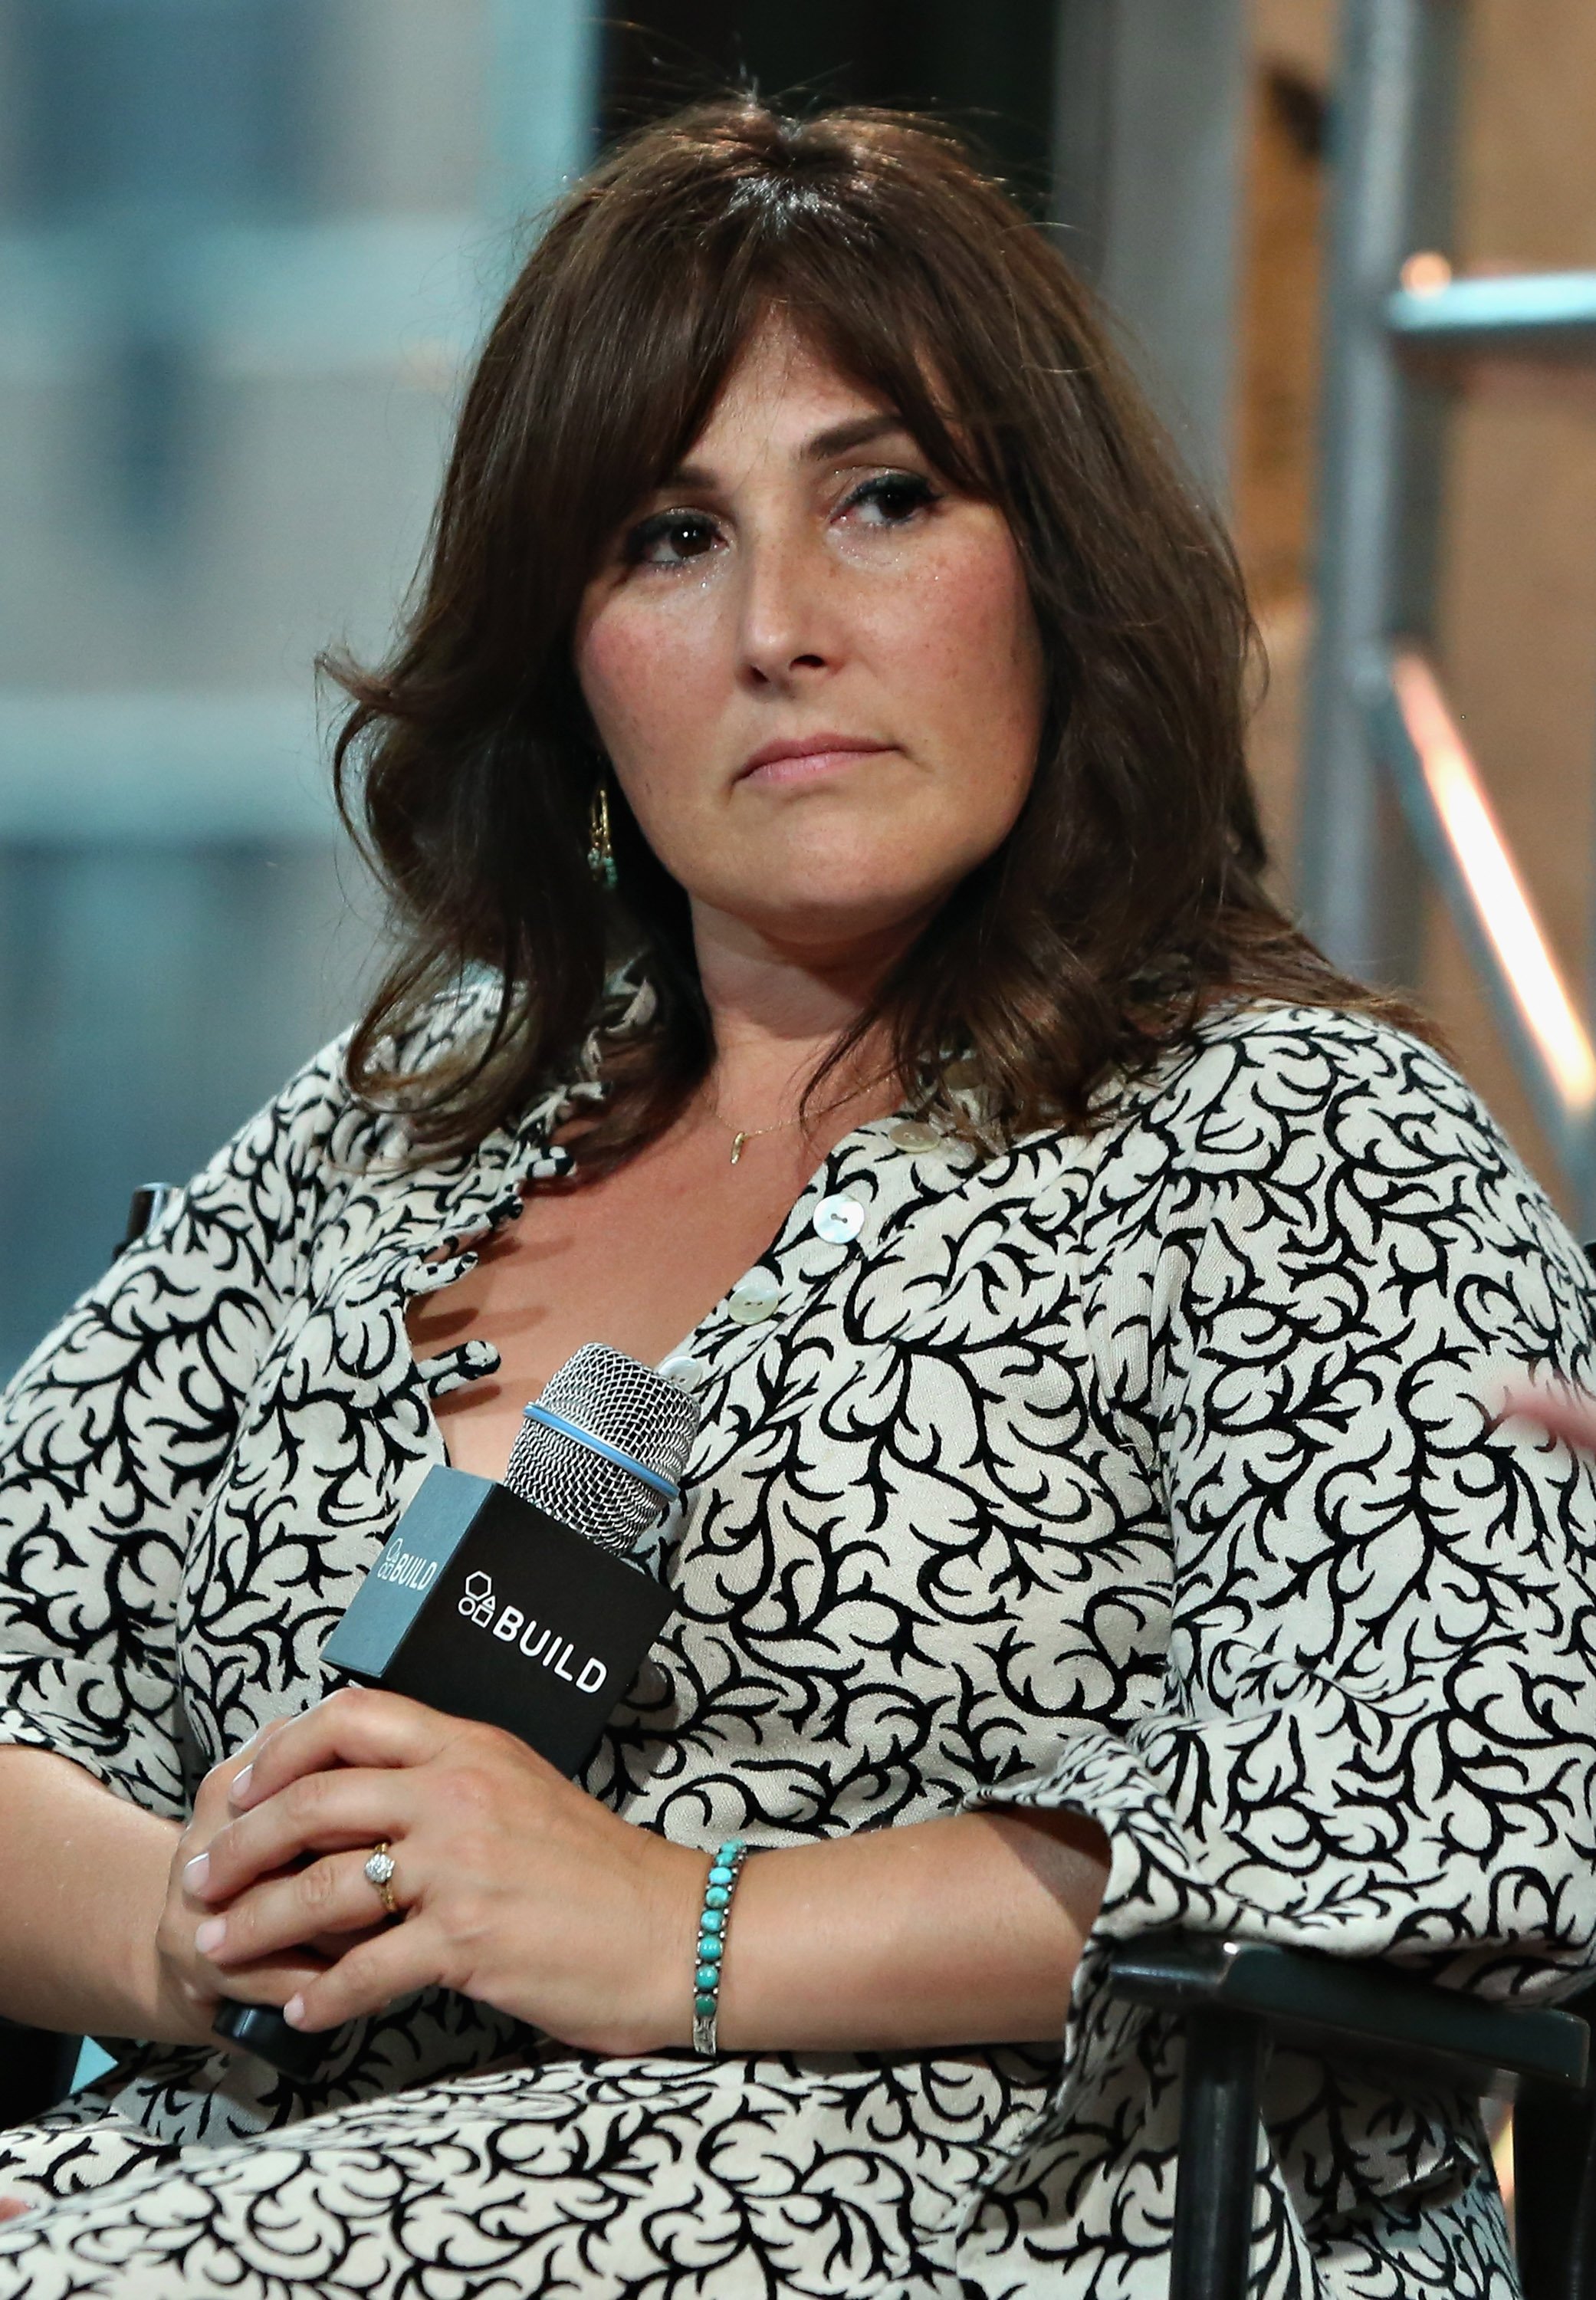 Ricki Lake on August 10, 2015 in New York City | Photo: Getty Images